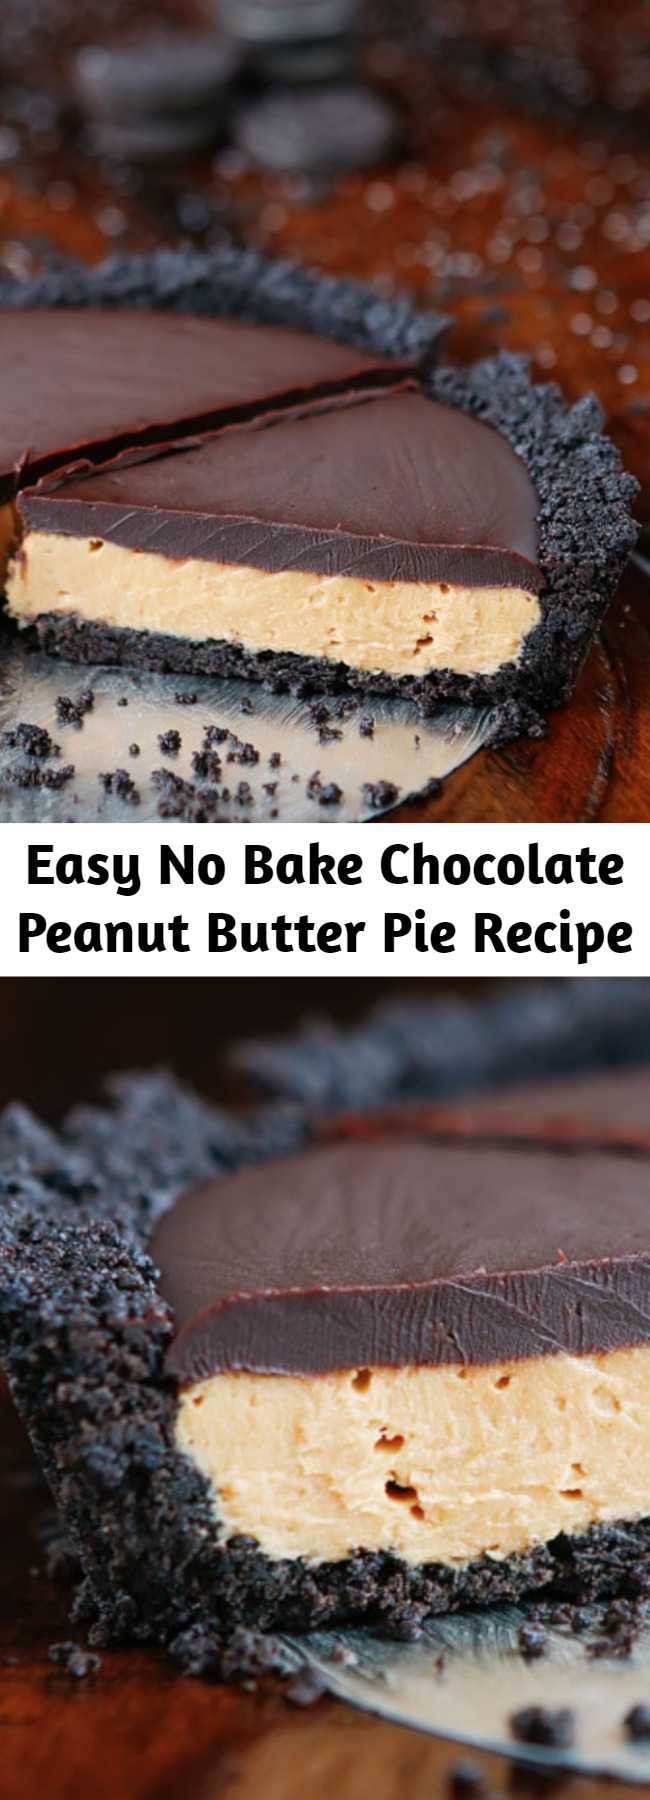 Easy No Bake Chocolate Peanut Butter Pie Recipe - This Peanut Butter Pie recipe is OUT of this world!! This is hands down one of the easiest, most impressive desserts I’ve ever made. There’s only six simple ingredients — it’s the best no bake peanut butter pie ever!